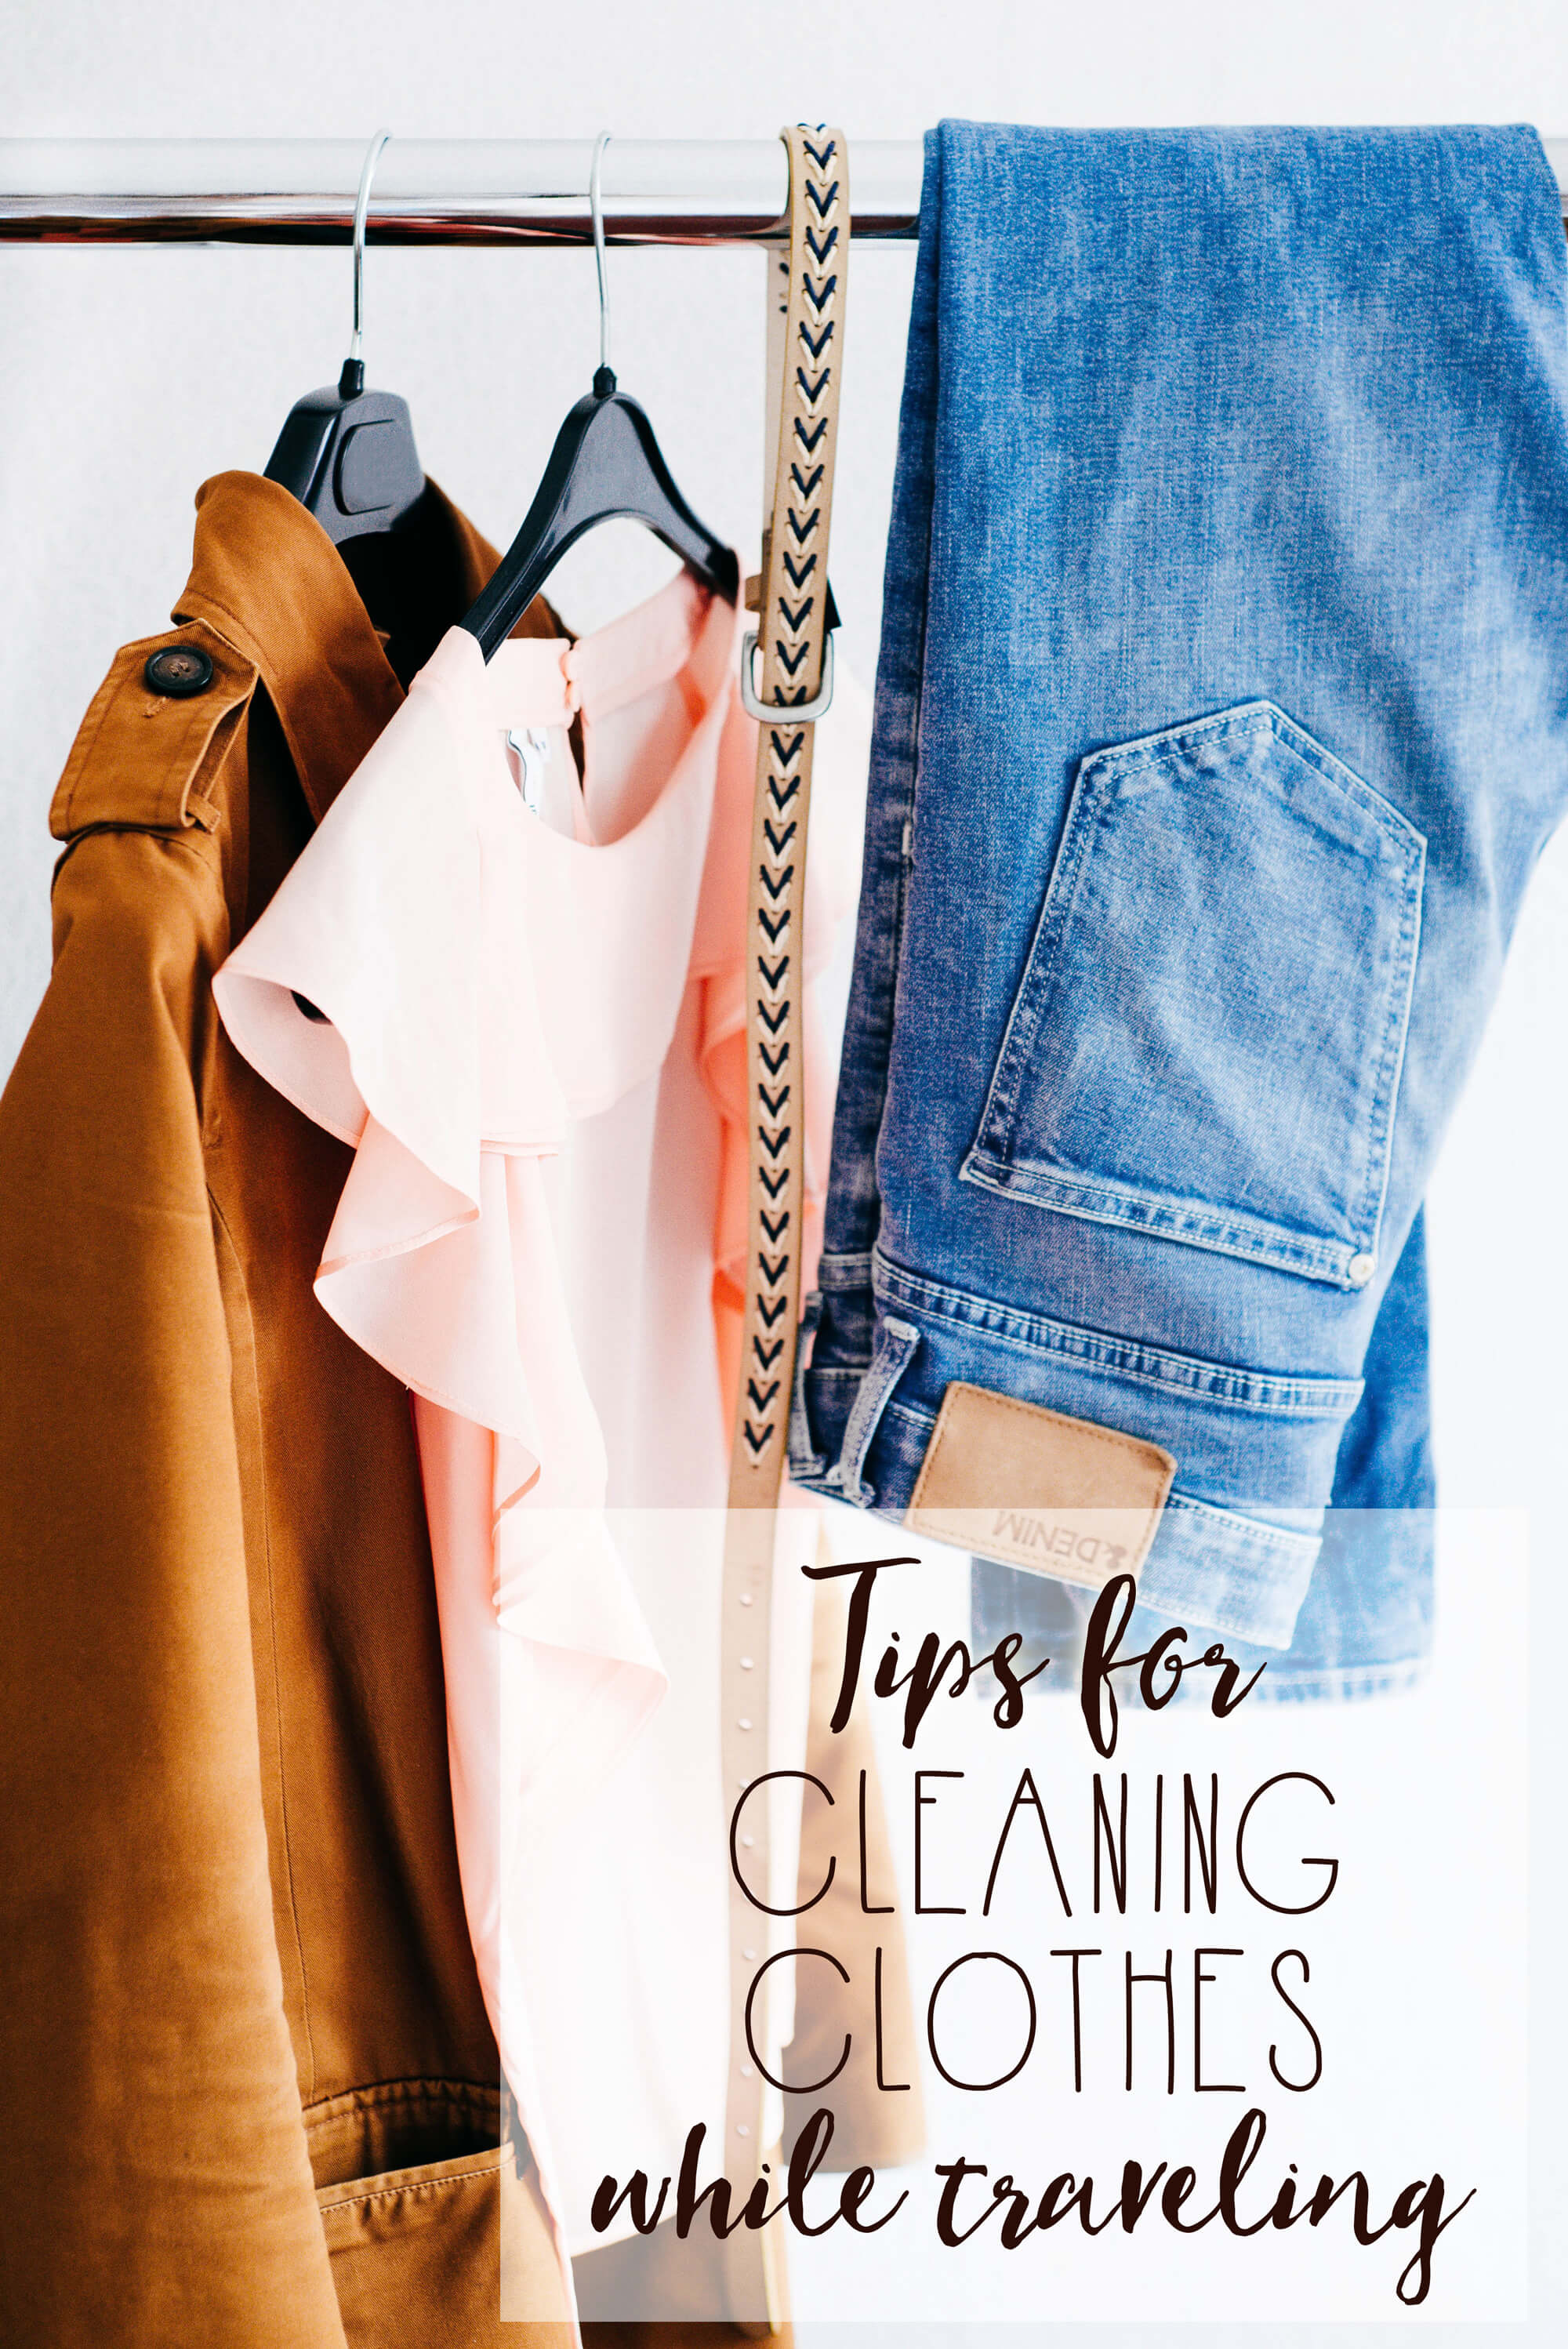 Tips for Cleaning Clothes While Traveling